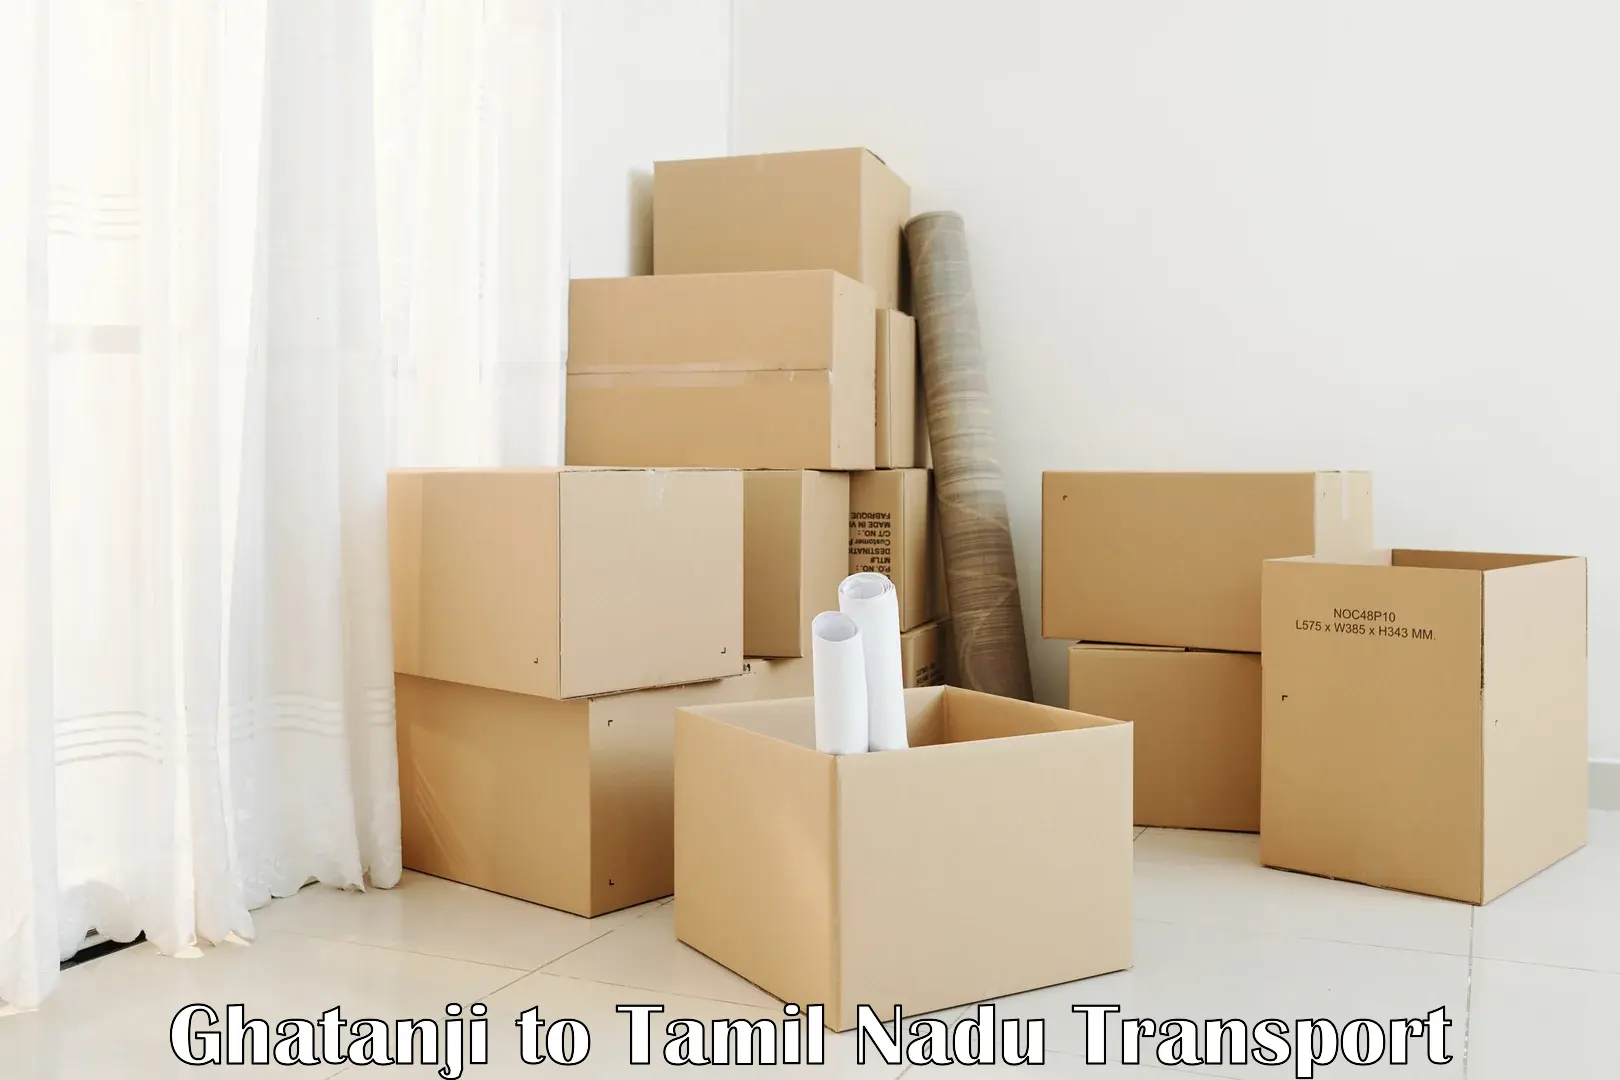 Container transport service in Ghatanji to Tamil Nadu